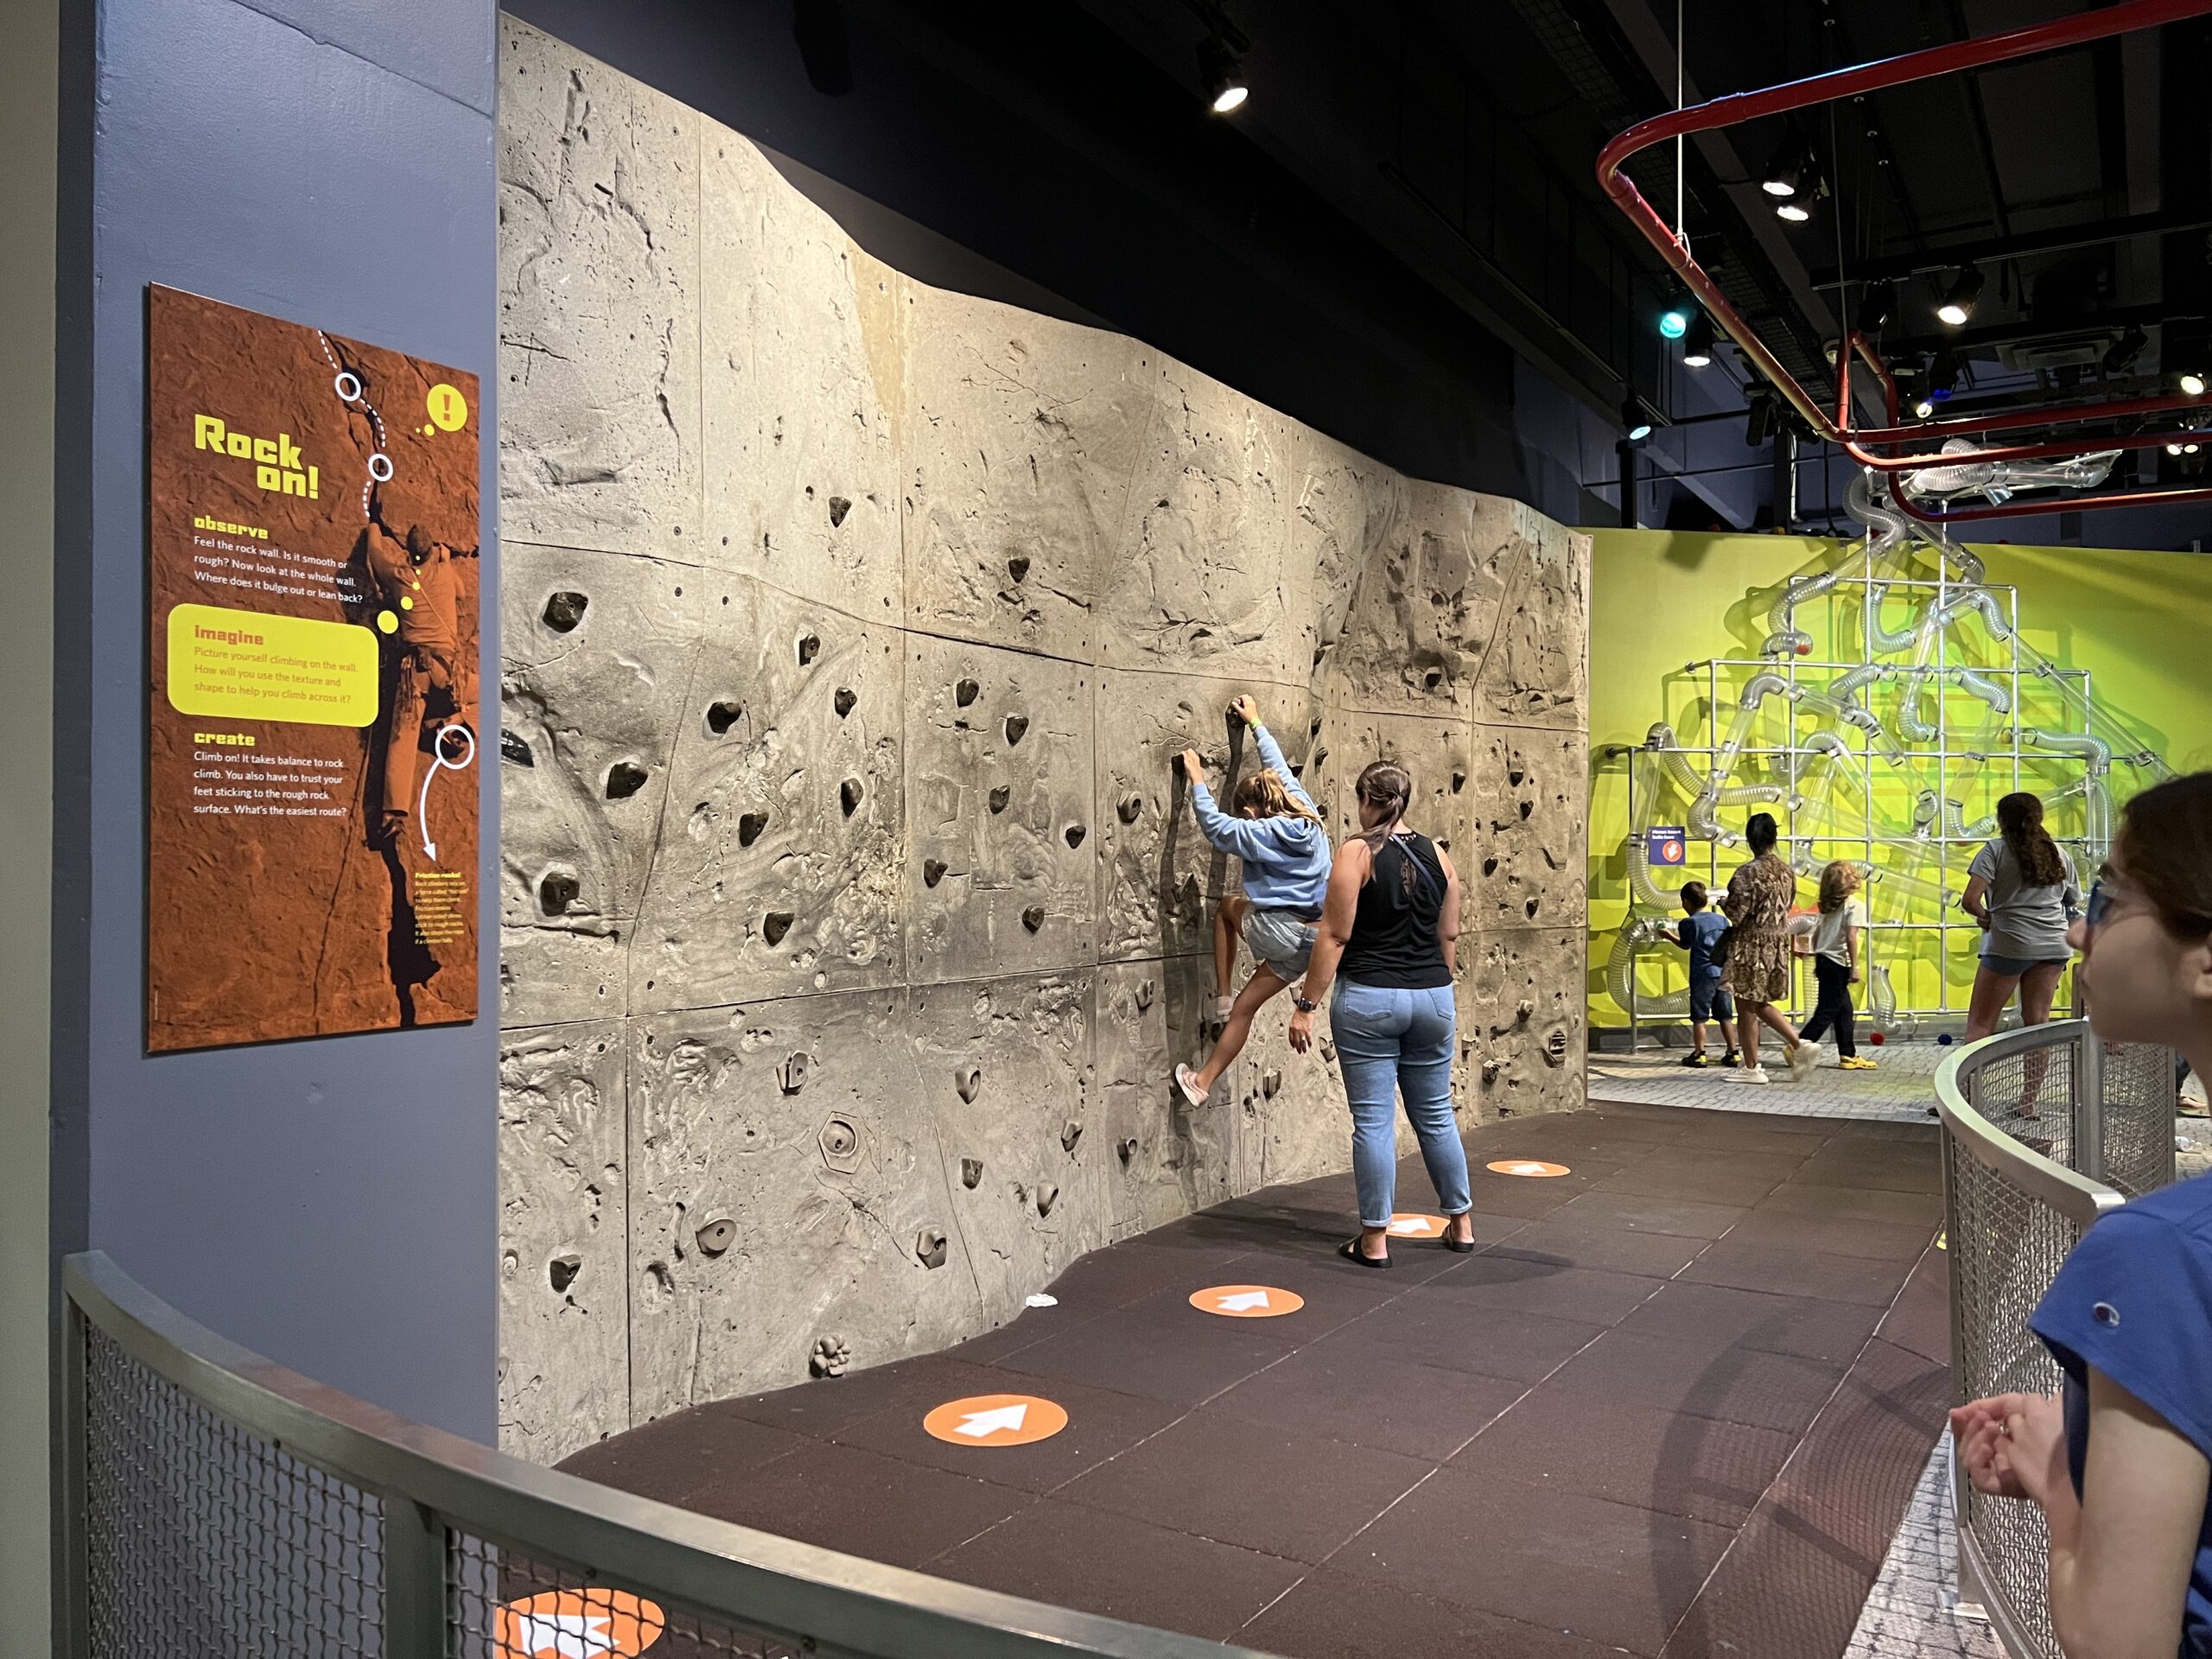 Rock climbing and Wonder Why wall at the Liberty Science Center in Jersey City NJ